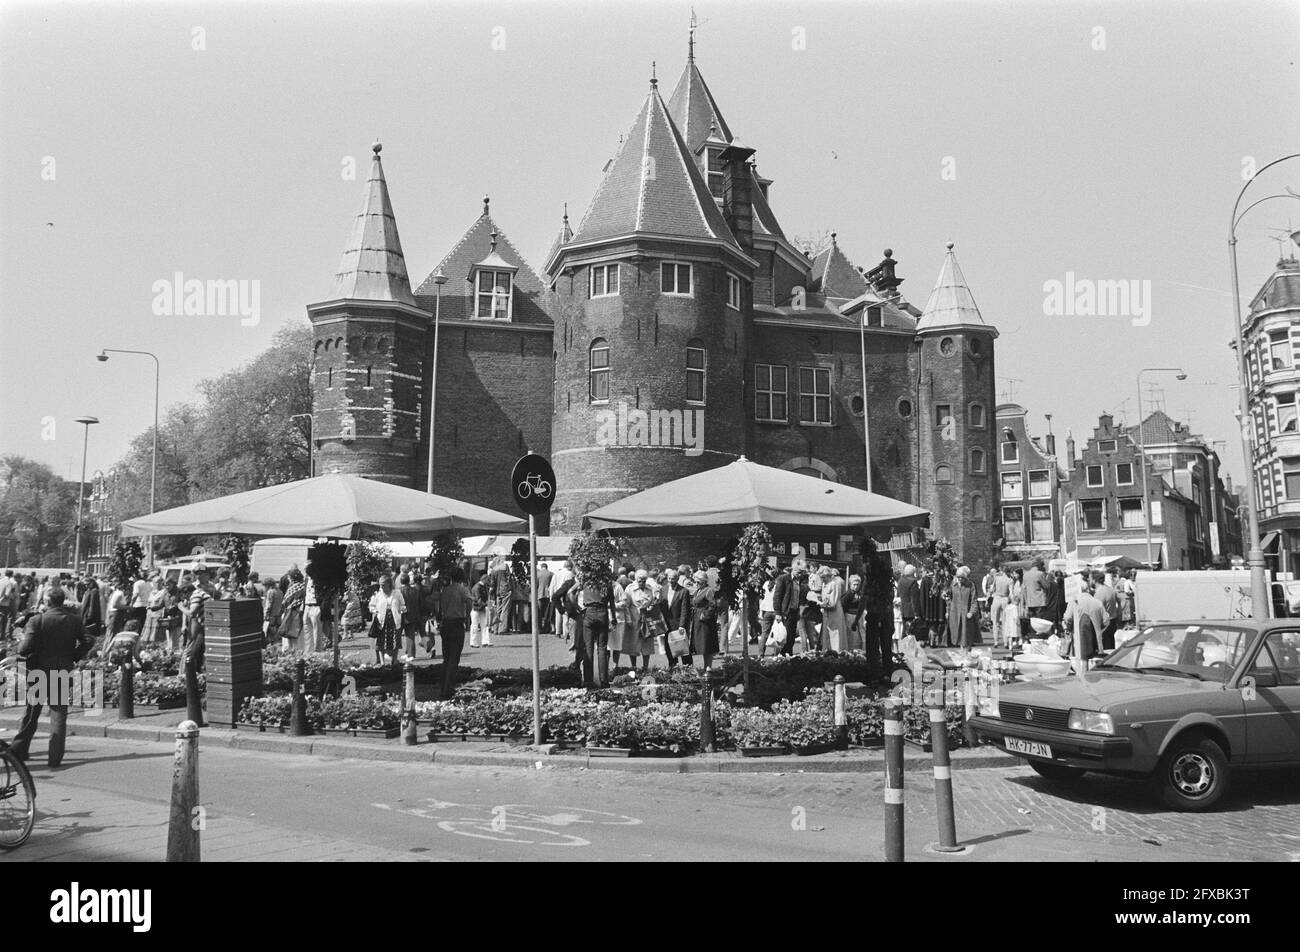 Annual geranium market on the Nieuwmarkt, in the background the Waag, May 15, 1982, markets, The Netherlands, 20th century press agency photo, news to remember, documentary, historic photography 1945-1990, visual stories, human history of the Twentieth Century, capturing moments in time Stock Photo